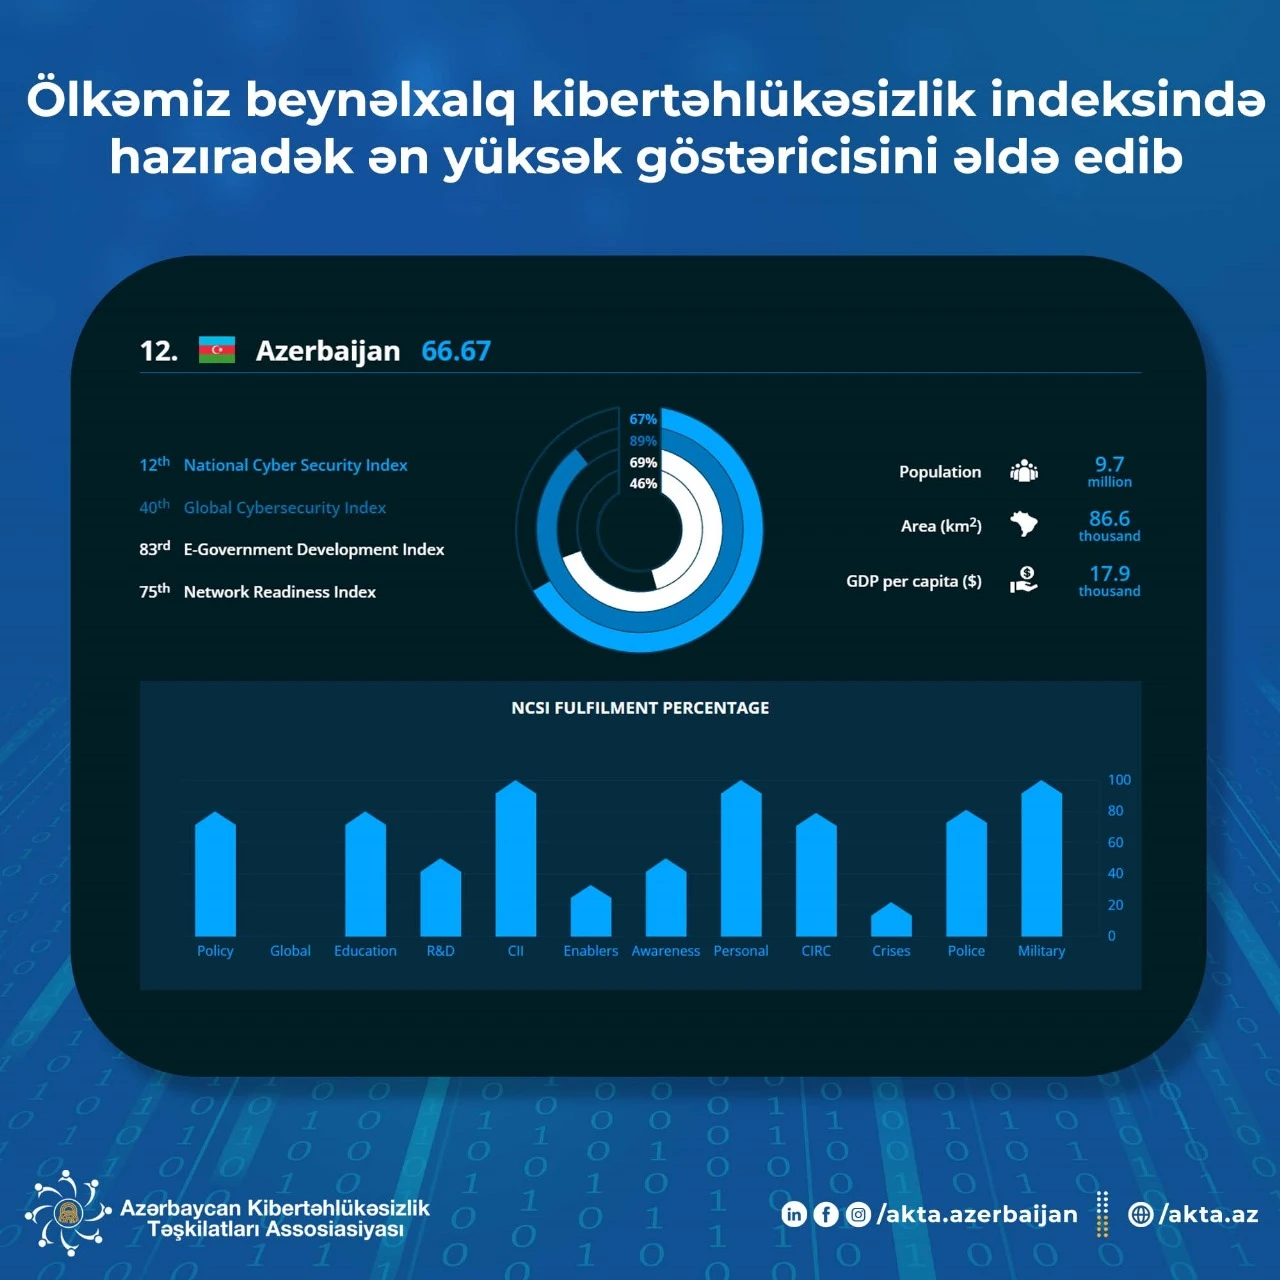 Azerbaijan has achieved the highest indicator in the Cybersecurity Index so far